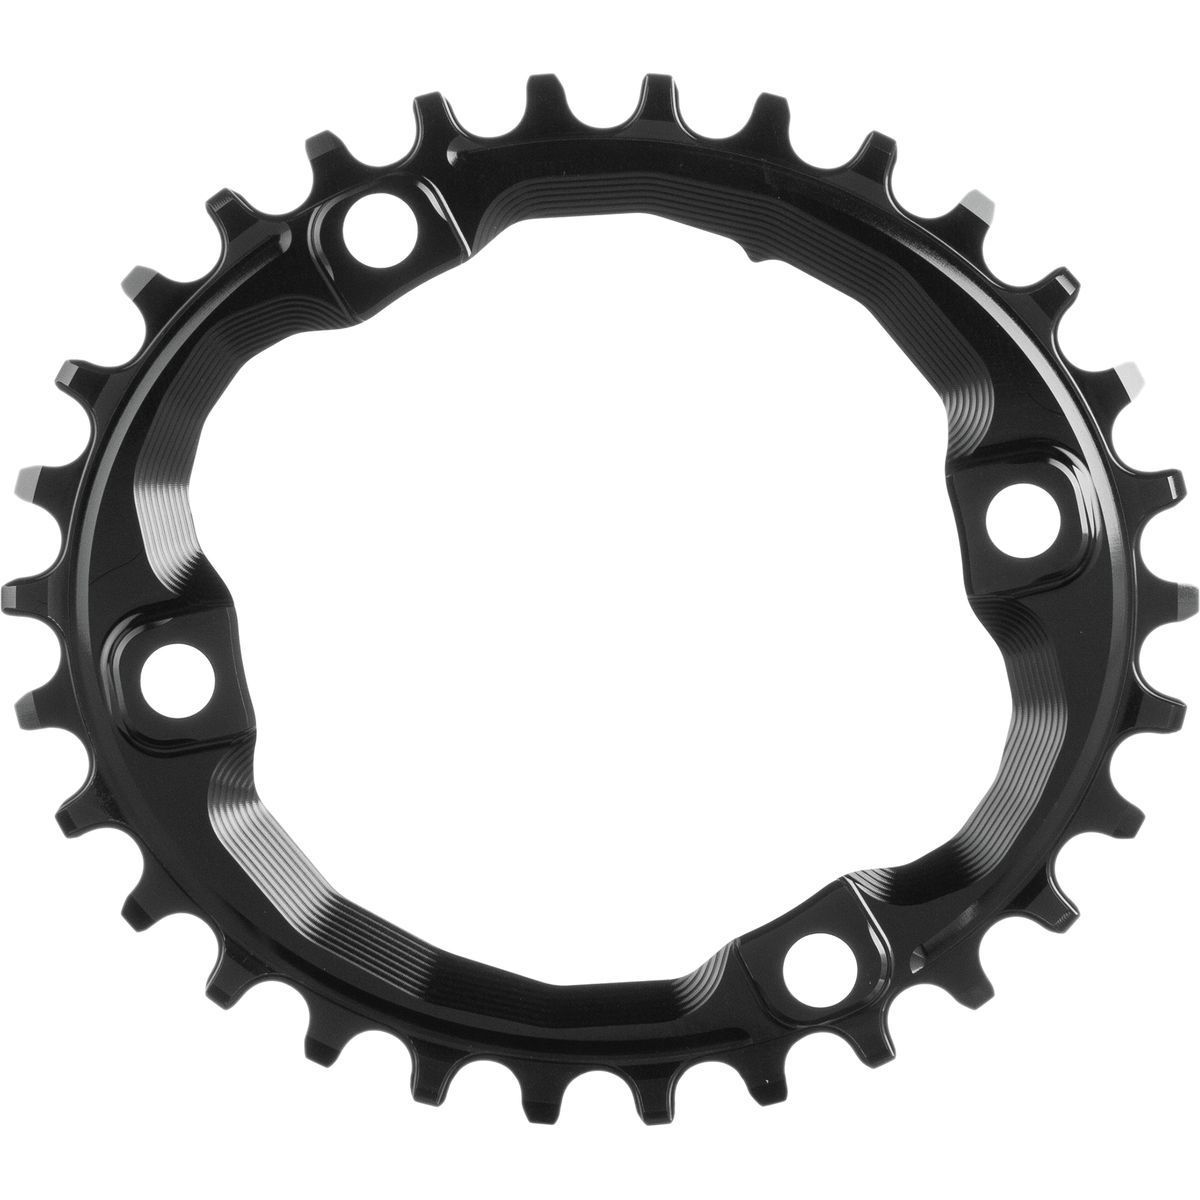 Absolute Black Shimano Oval Traction Chainring